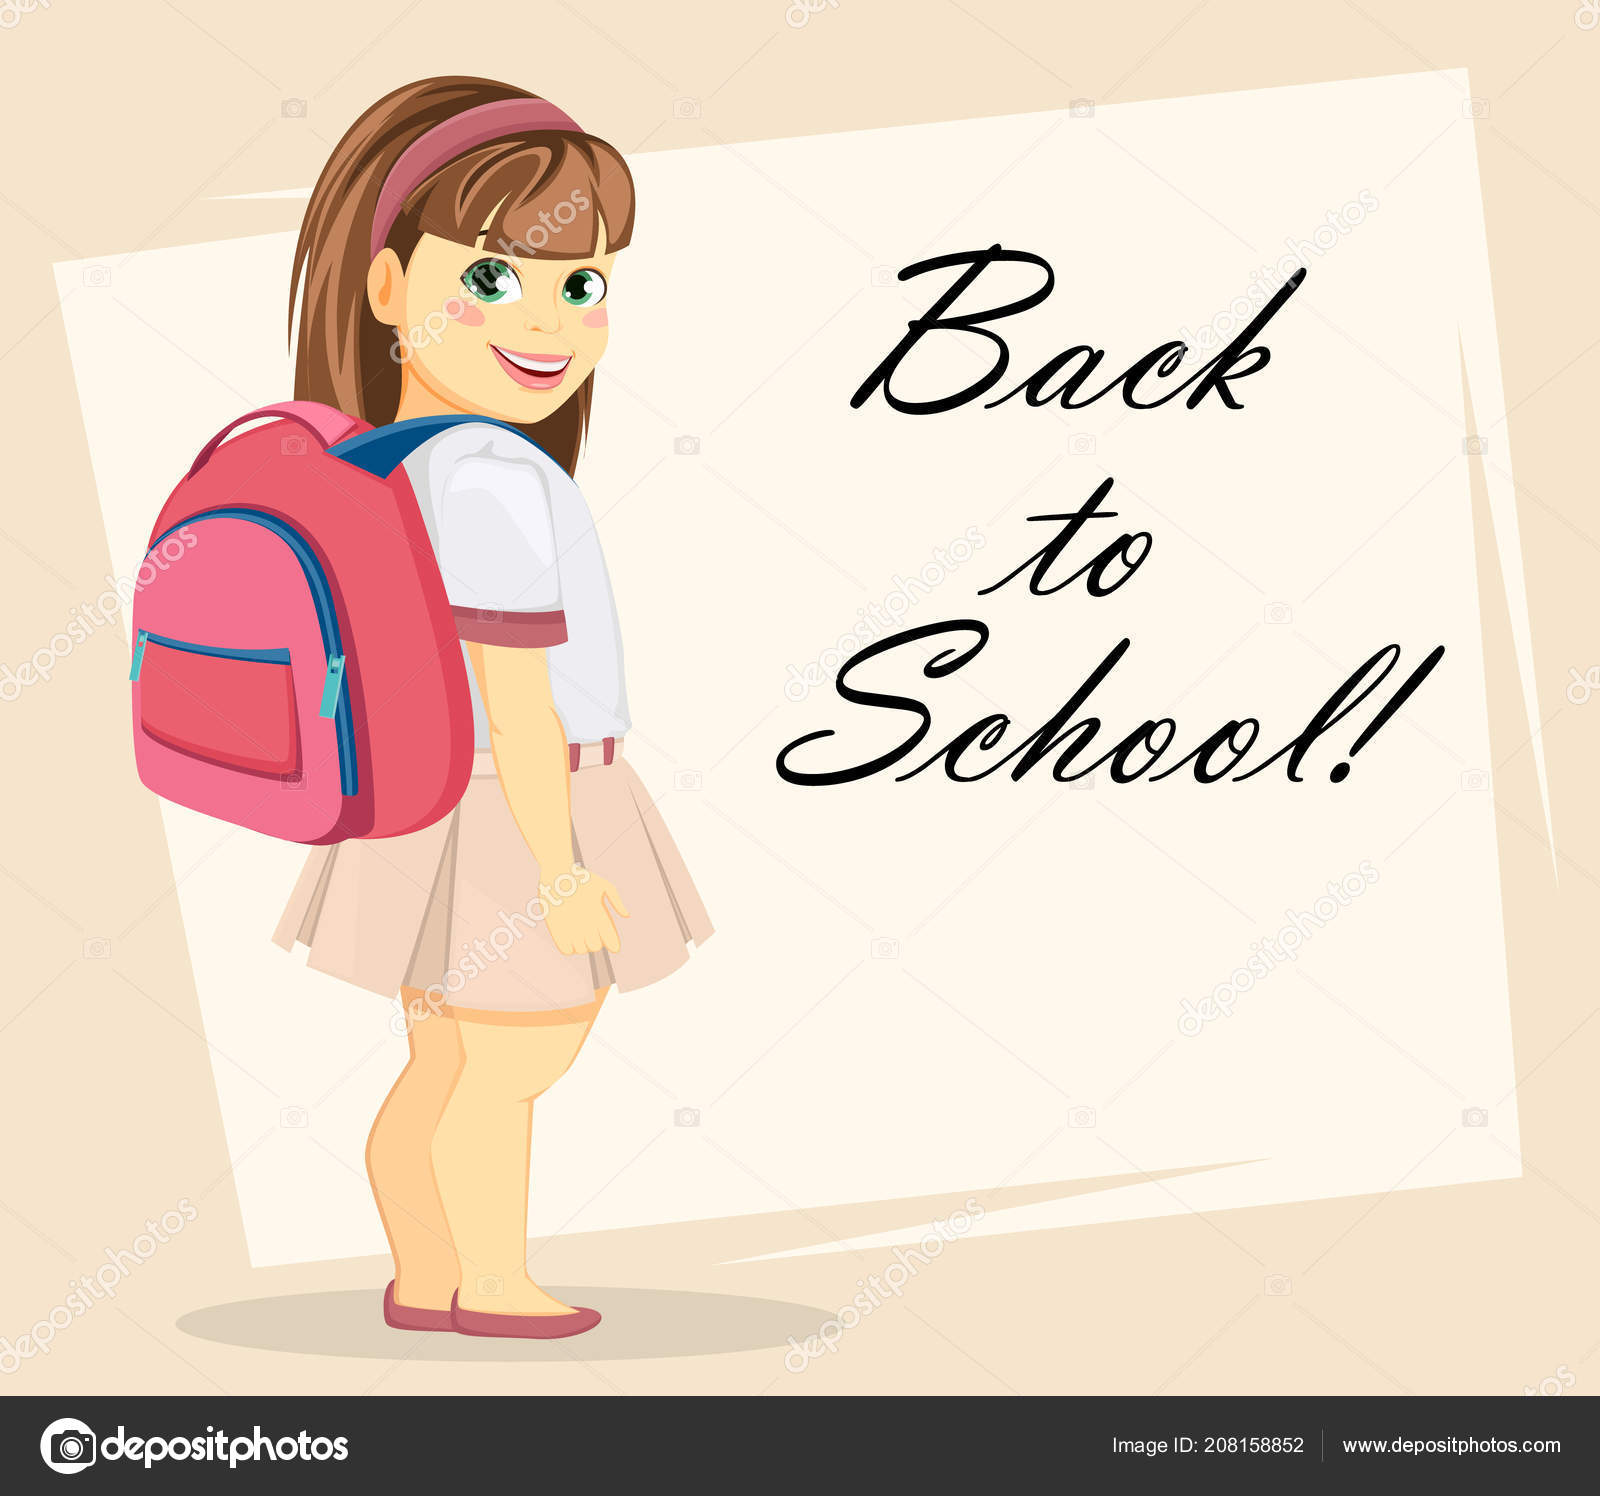 Welcome Back School Greeting Card Poster Flyer Girl Ready School Vector Image By C Vectorkif Vector Stock